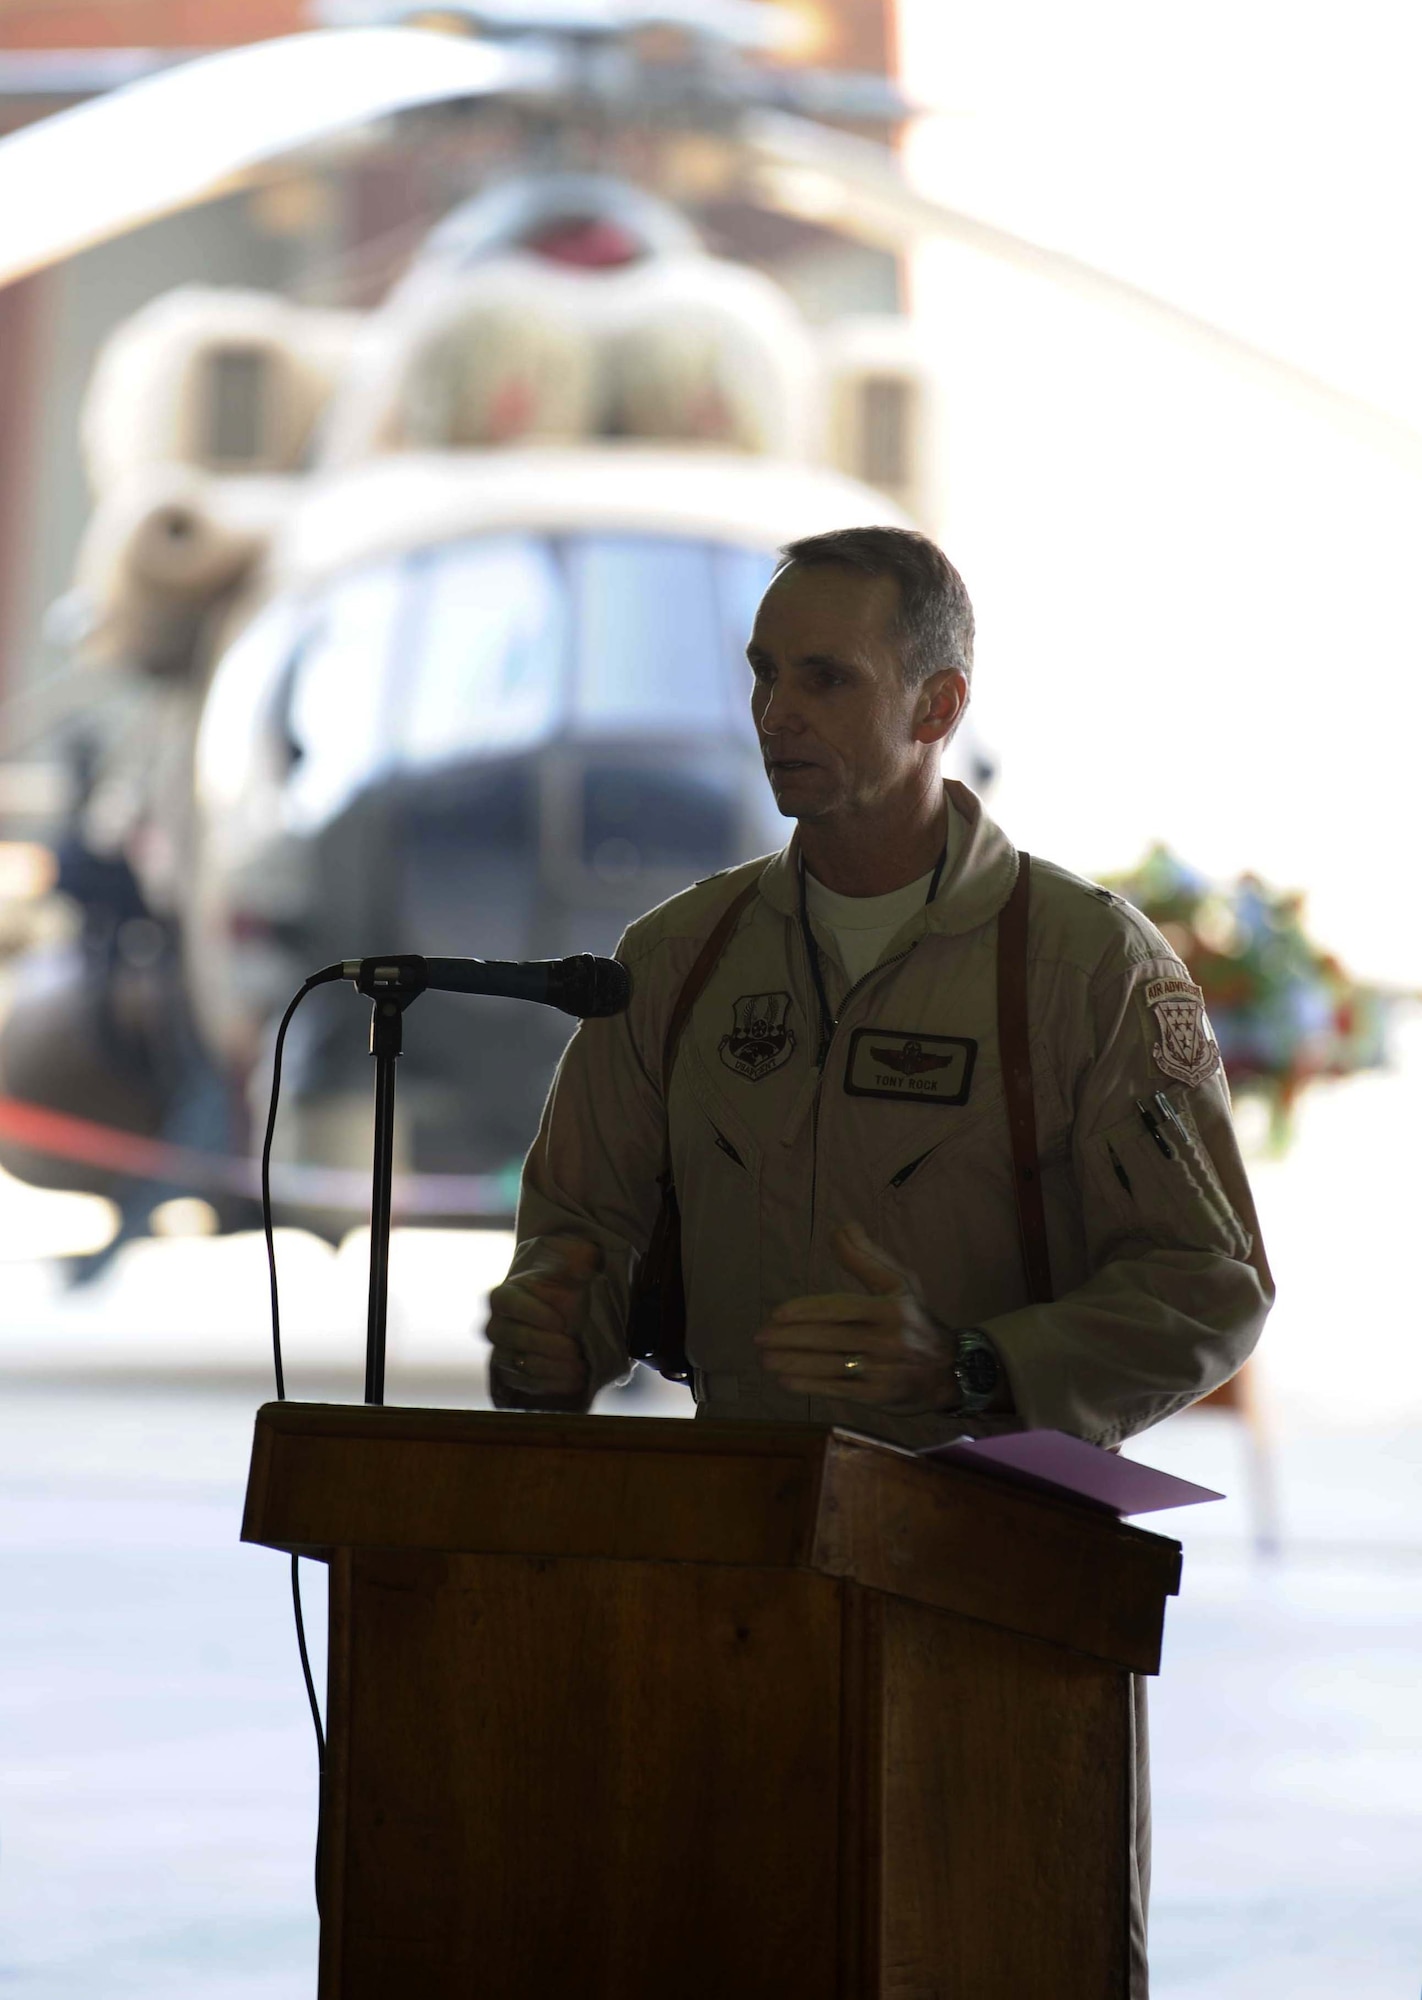 Brig. Gen. Anthony Rock, 321st Air Expeditionary Wing commander, and Iraq Training and Advisory Mission director, addresses the crowd at the ribbon-cutting ceremony in Taji Jan. 17.  The massive aircraft hangar is a $9.8 million project that began in 2009. (US Air Force Photo by TSgt Randy Redman, released)